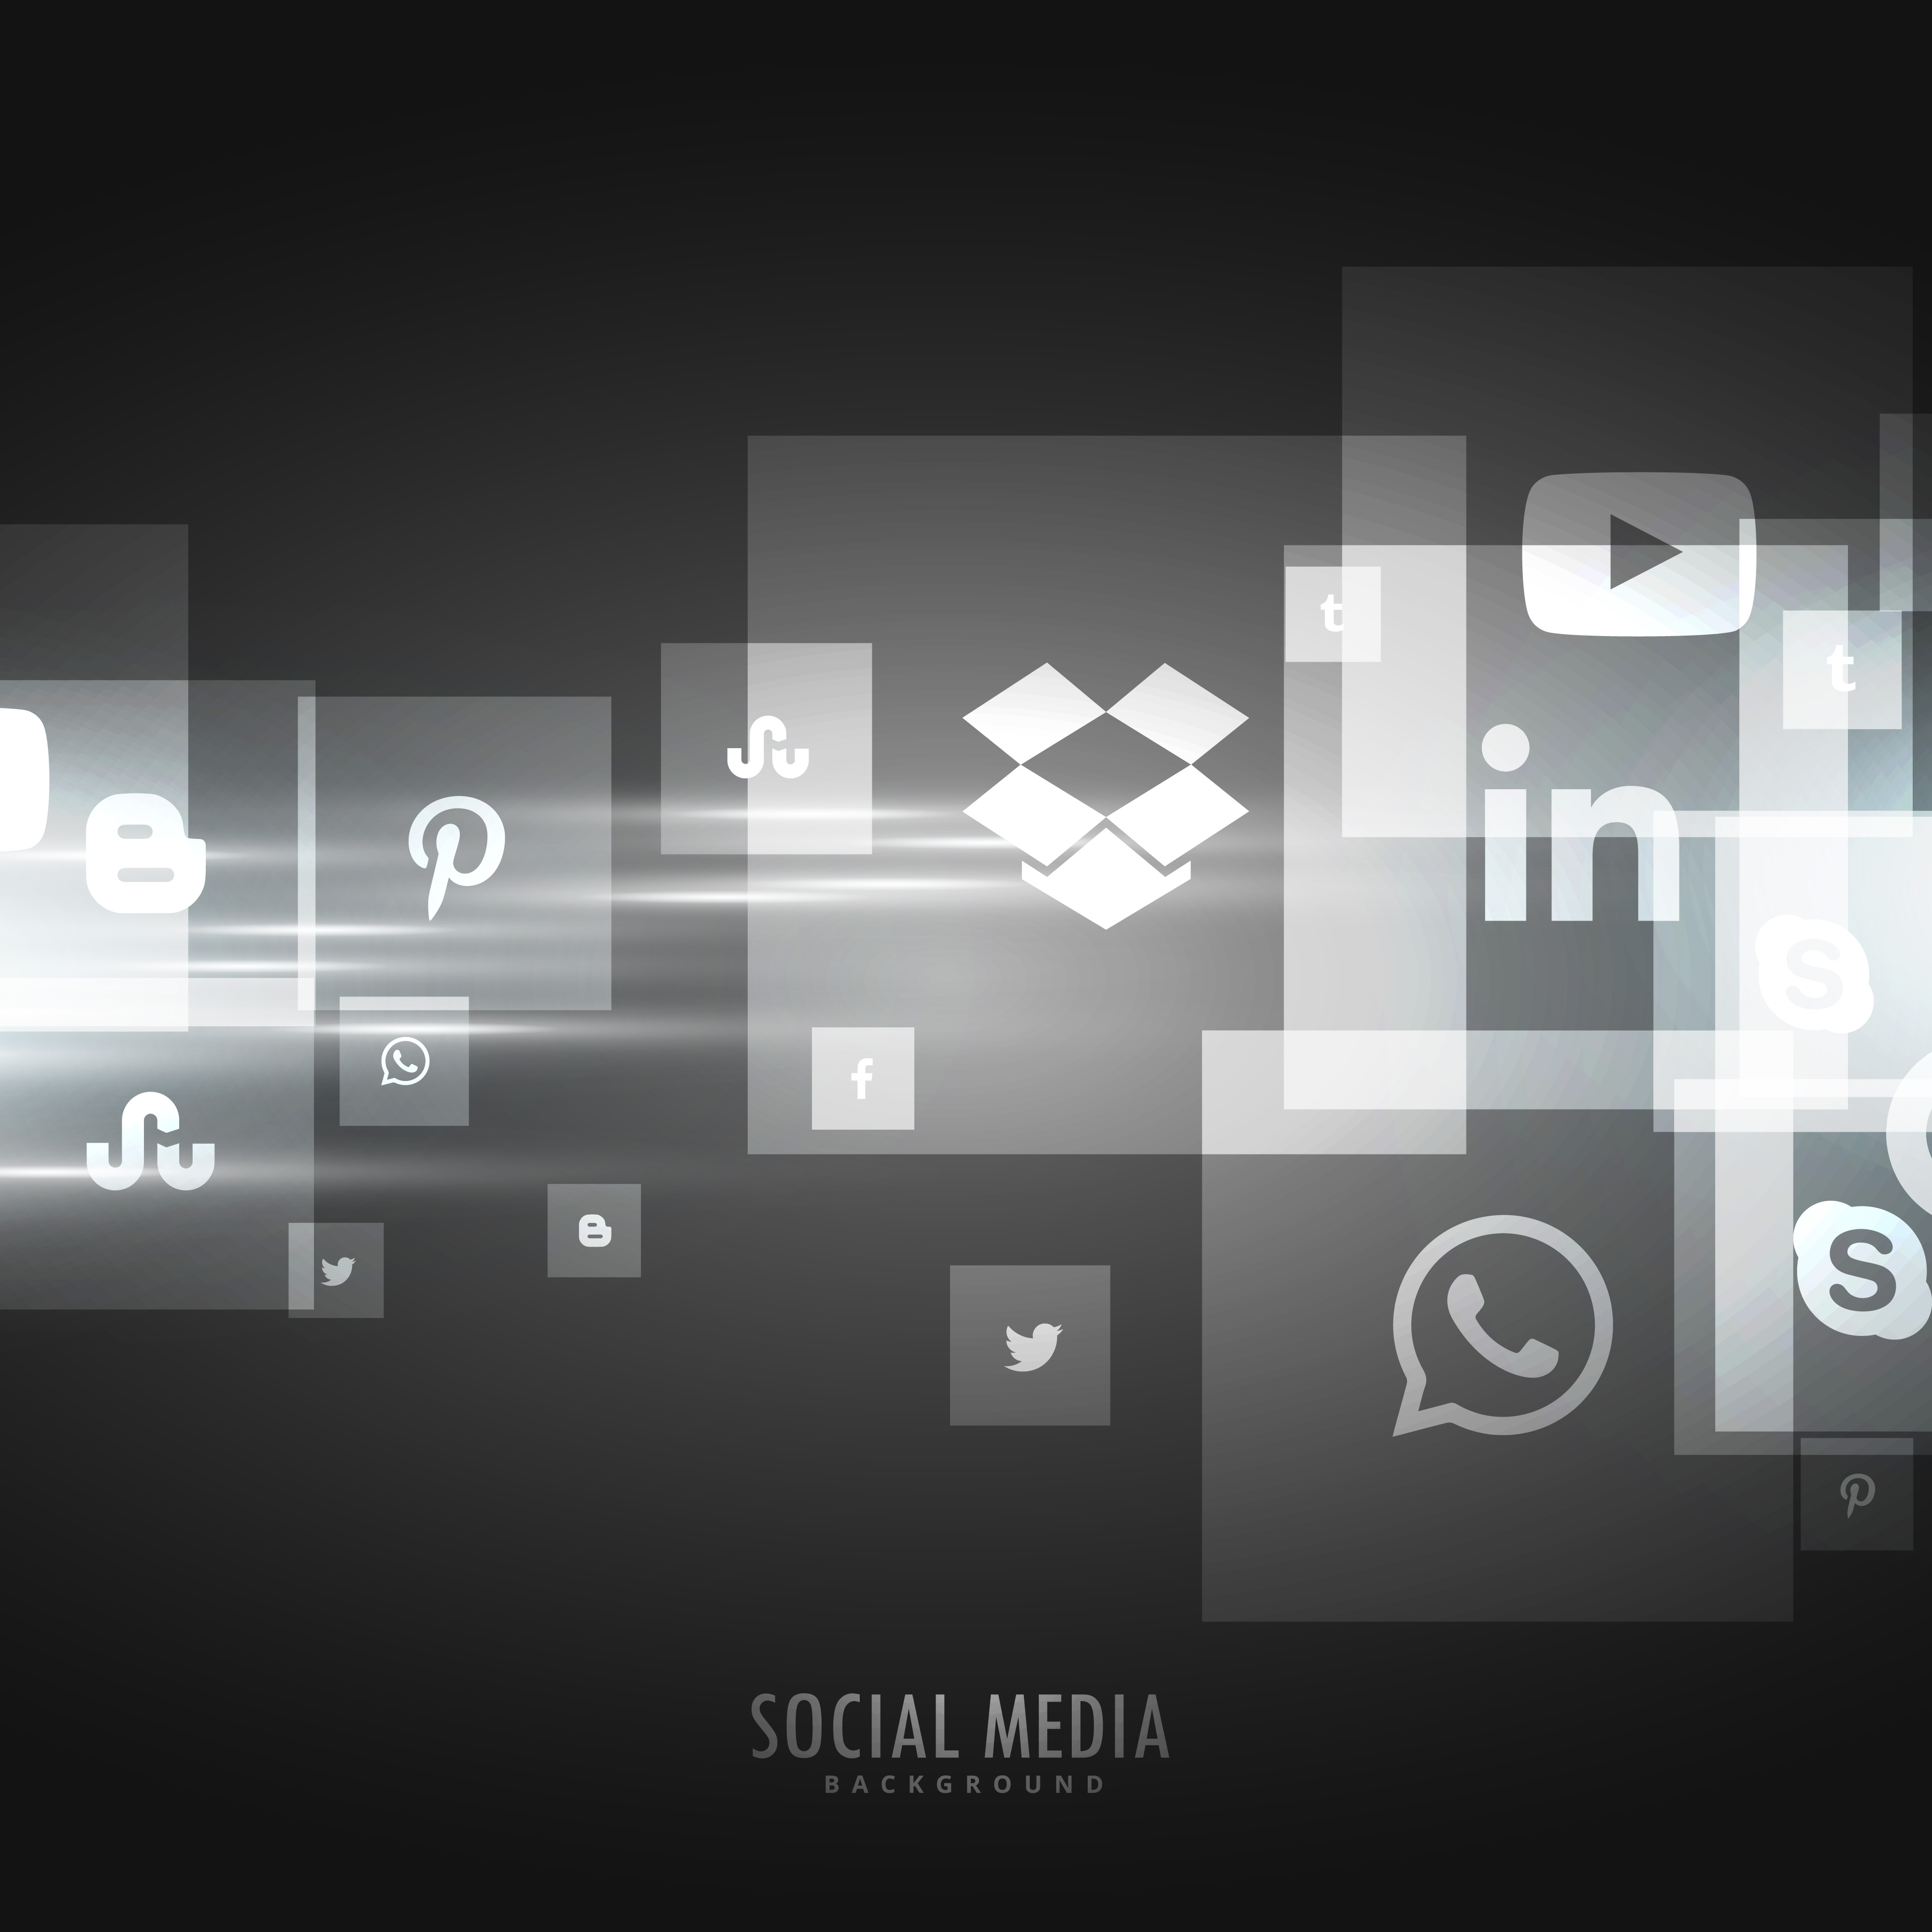 Dark Background With Social Media Icons Download Free Vector Art